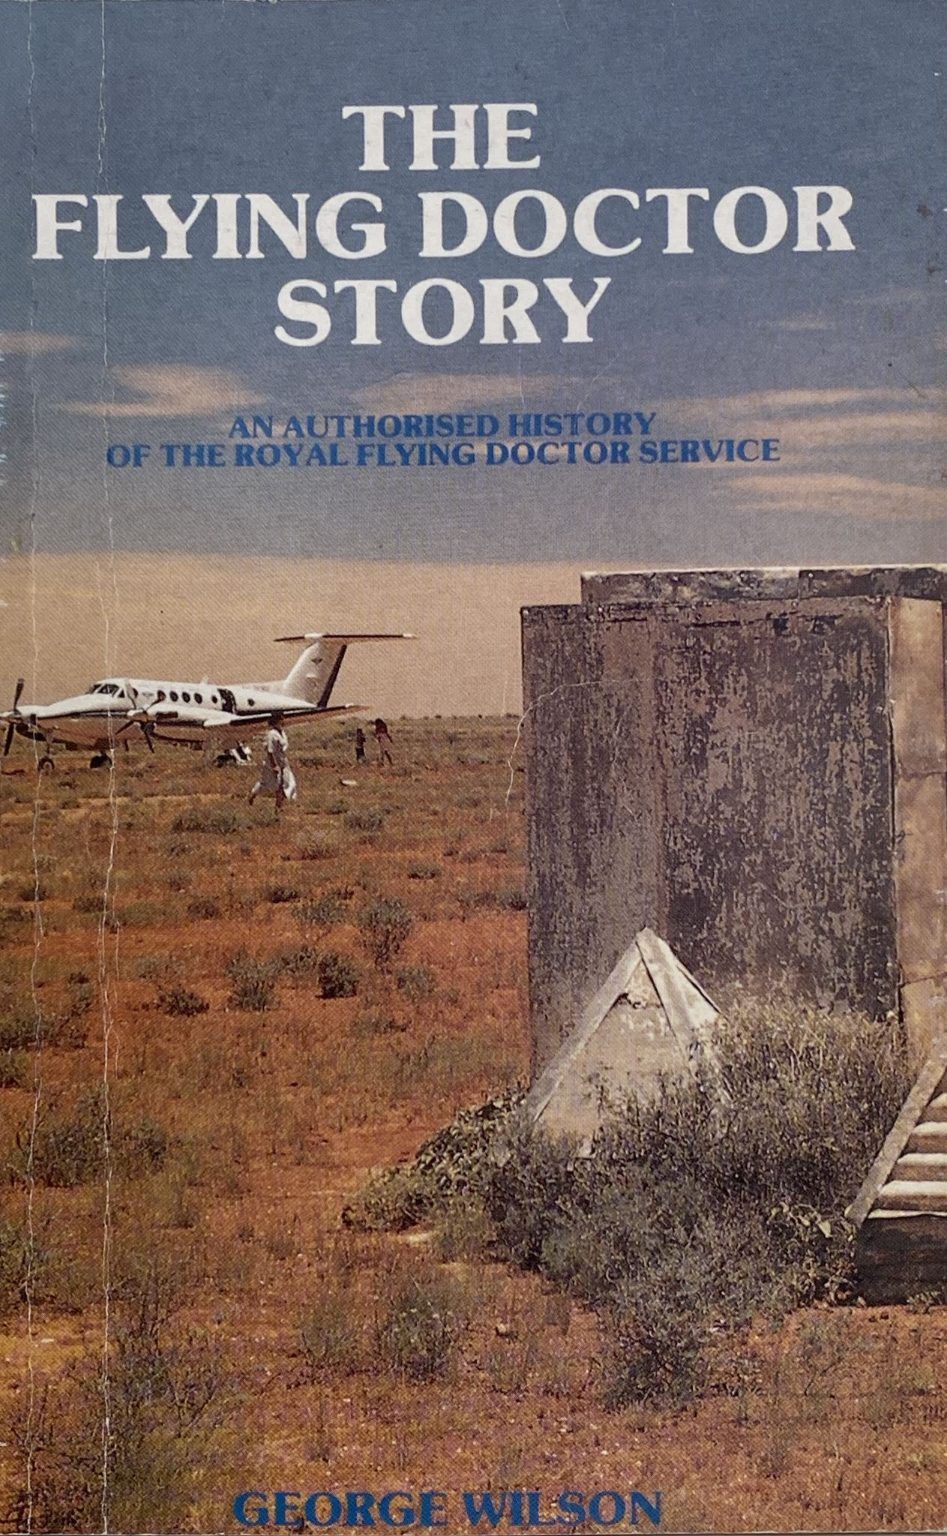 THE FLYING DOCTOR STORY: An Authorised History of The Royal Flying Doctor Service